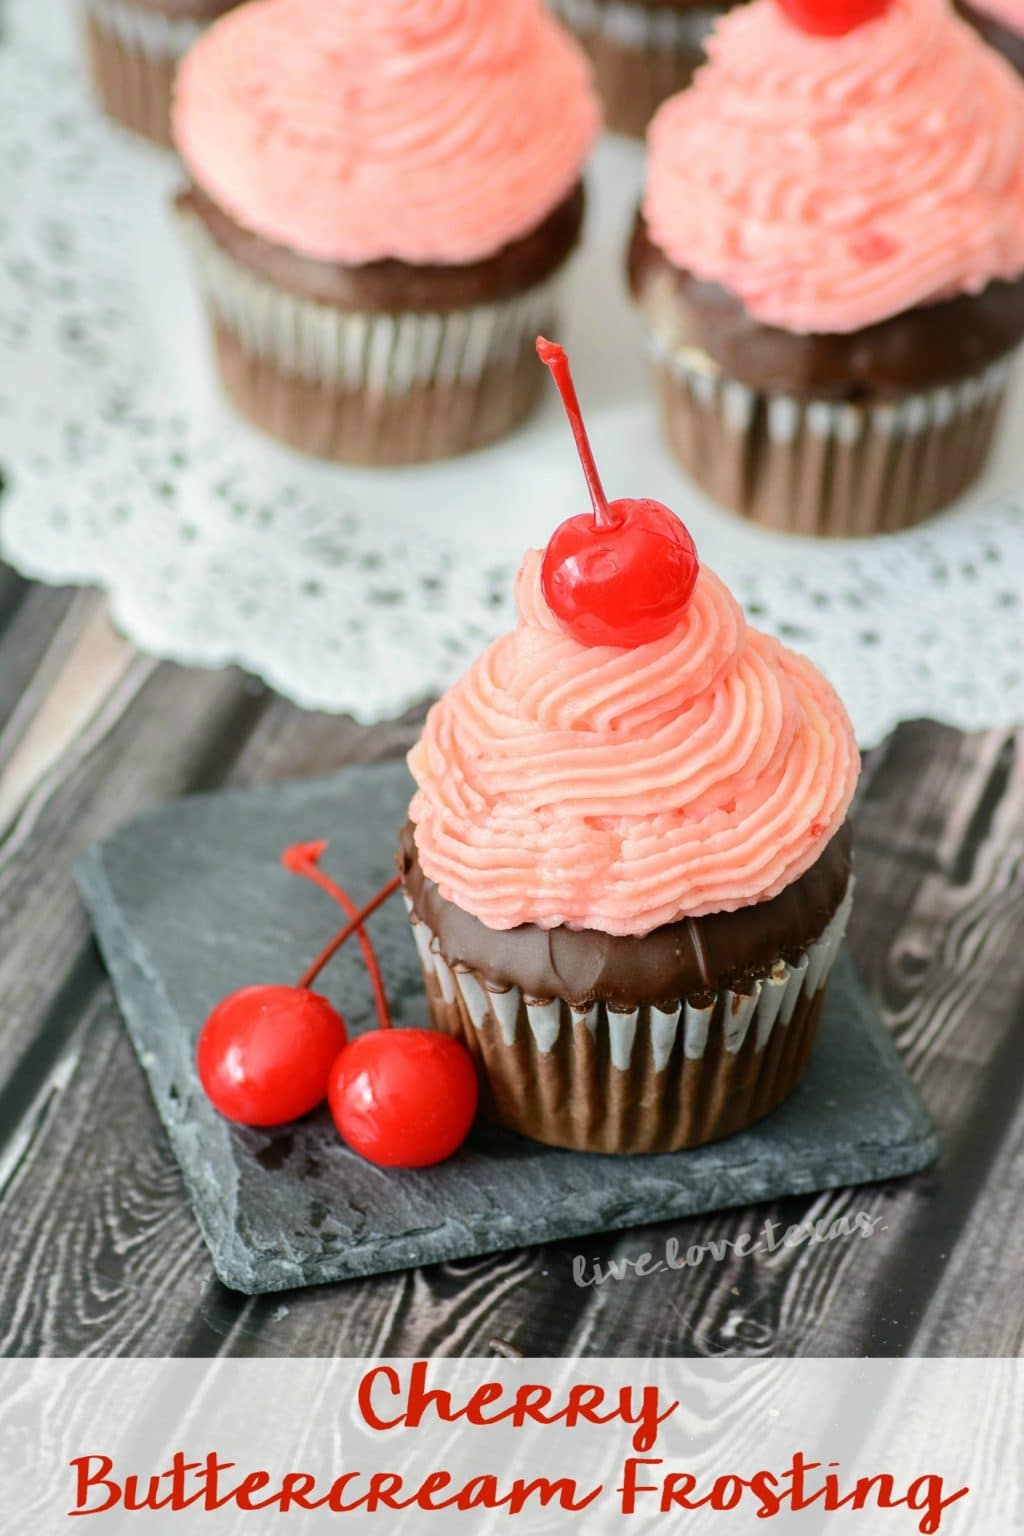 You'll never believe how easy this maraschino Cherry Buttercream Frosting recipe is to make! This is the perfect finish to any easy dessert recipe...especially cupcakes! #frosting #frostingrecipes #cherrybuttercream #cherryrecipes #desserts #dessertrecipes #cherrycupcakes #cherryicing #homemadefrosting #buttercreamfrosting